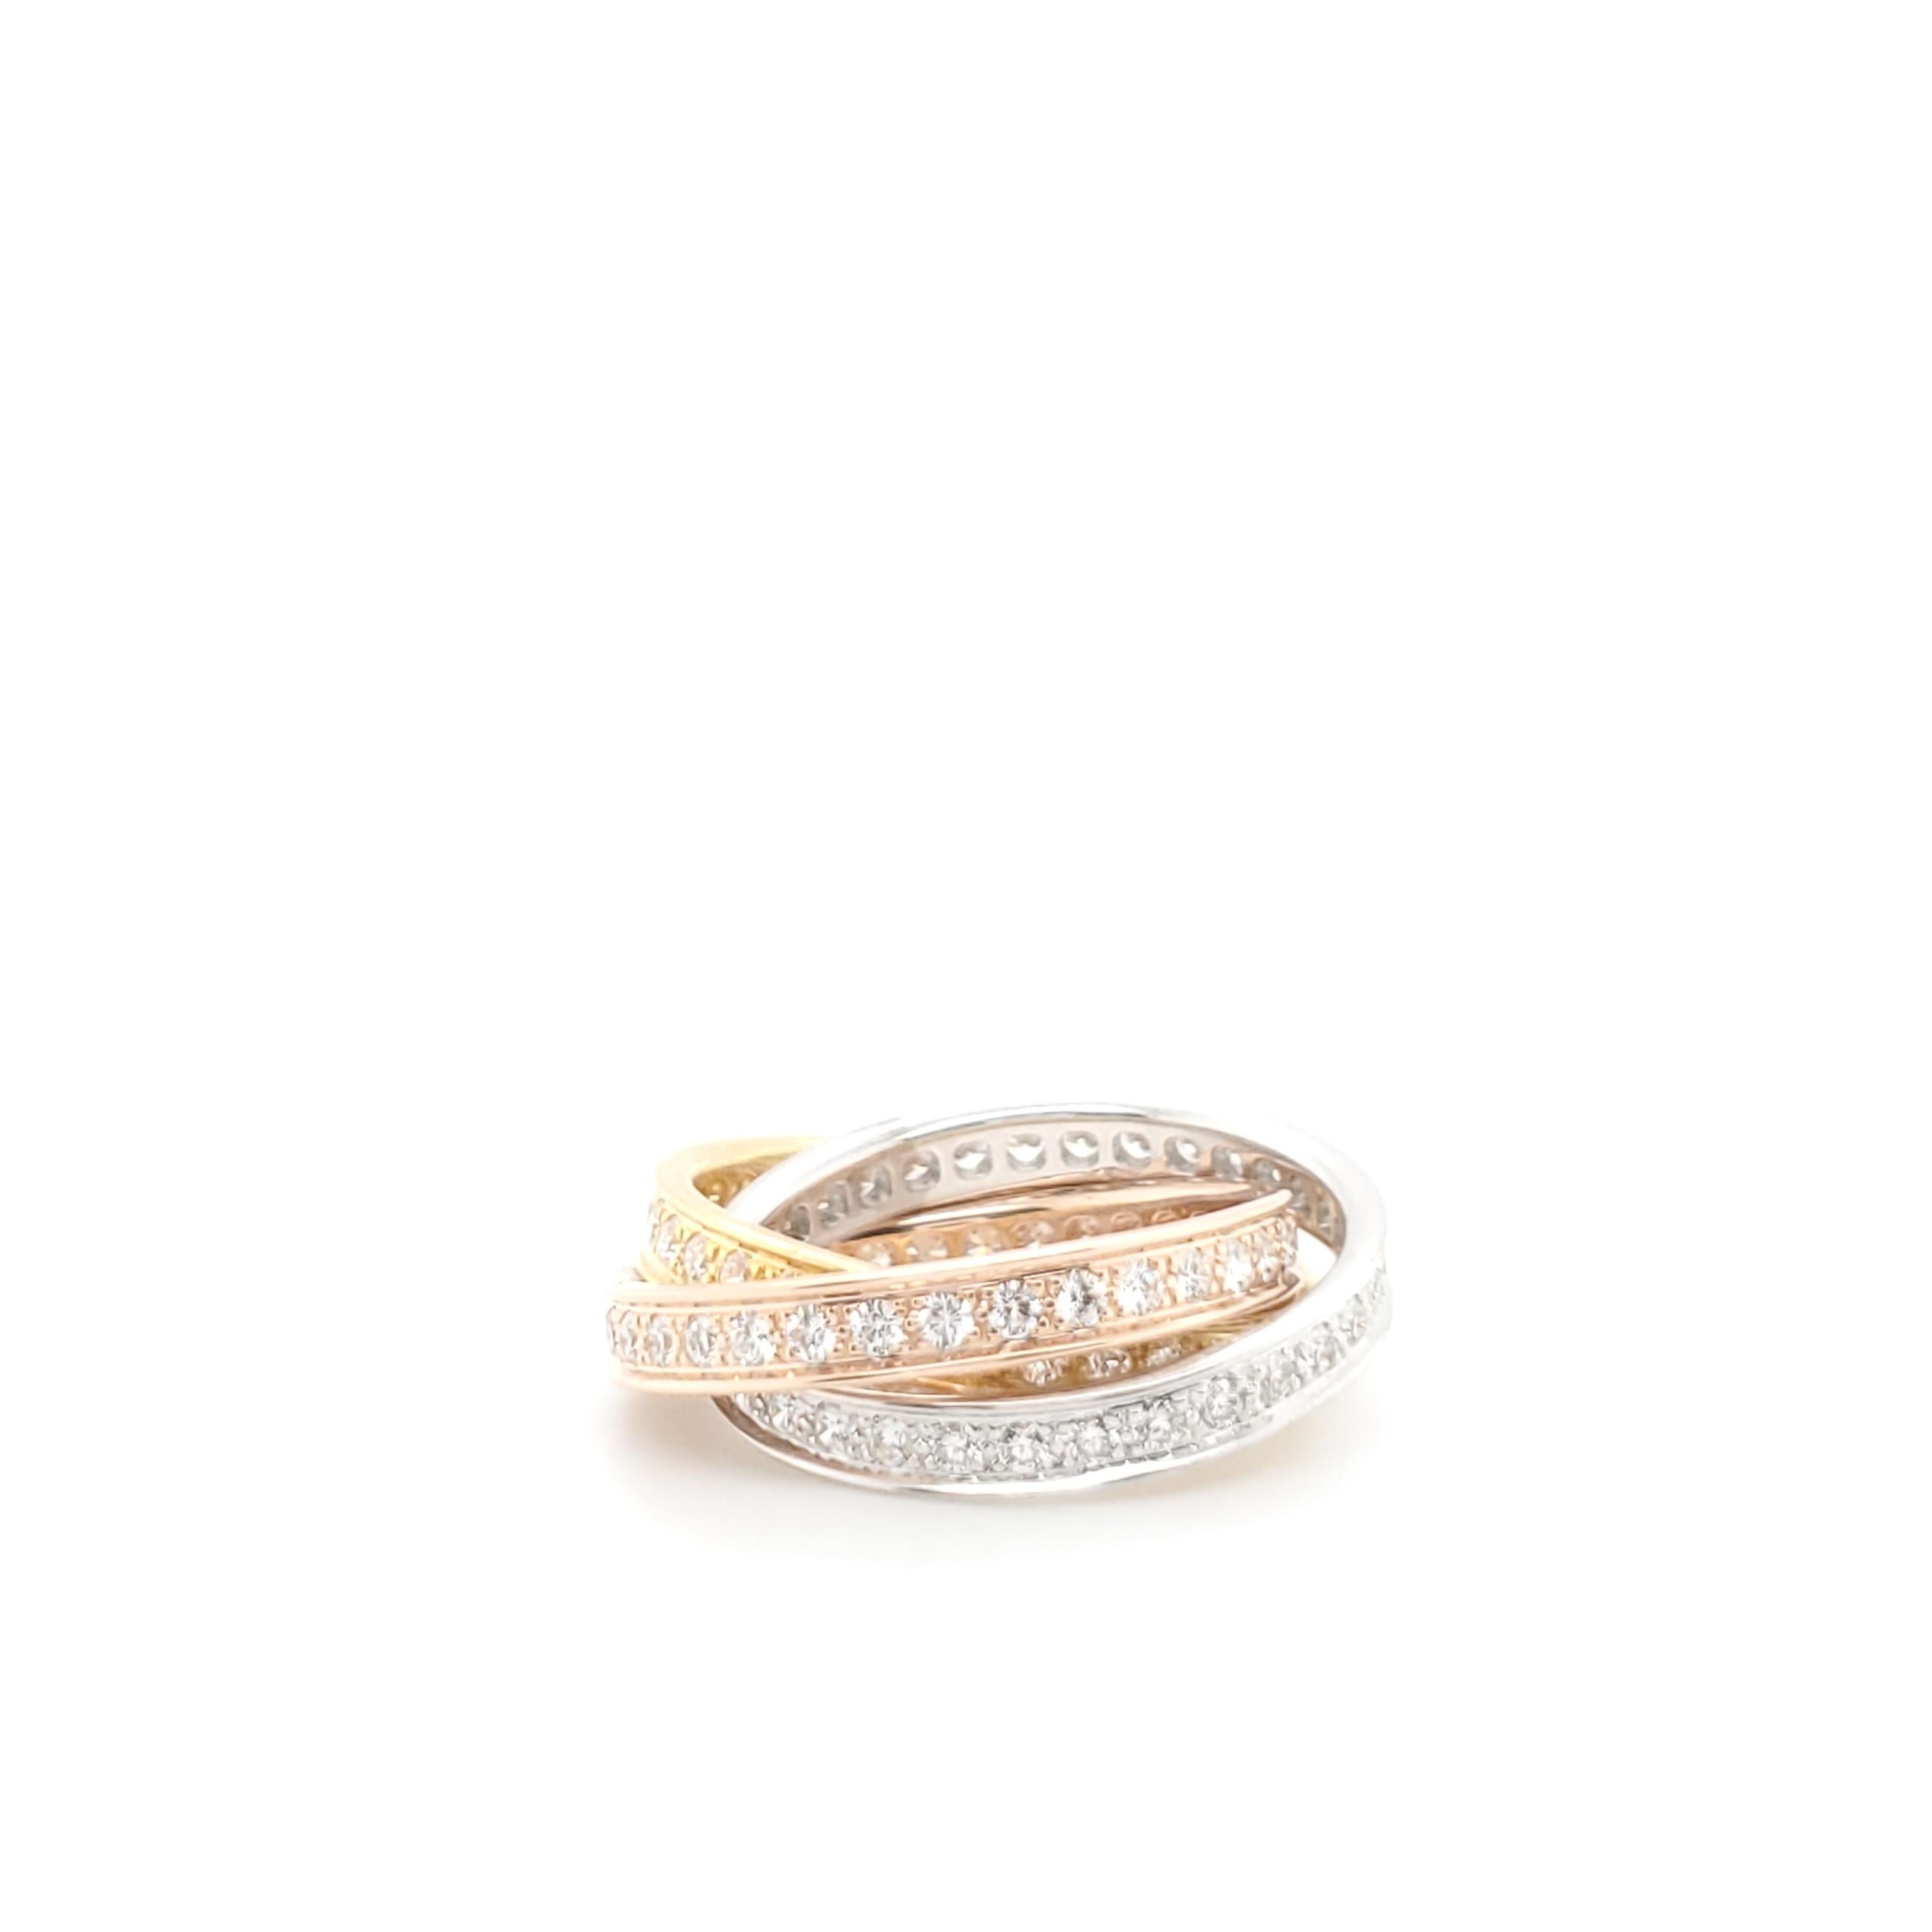 Authentic Cartier Trinity rolling ring in 18 karat tri-color gold with 96 diamonds, totalling approximately 1.92ct.  Stamped Cartier, 750.  Size 55.  Trinity ring comes with original Cartier box and papers